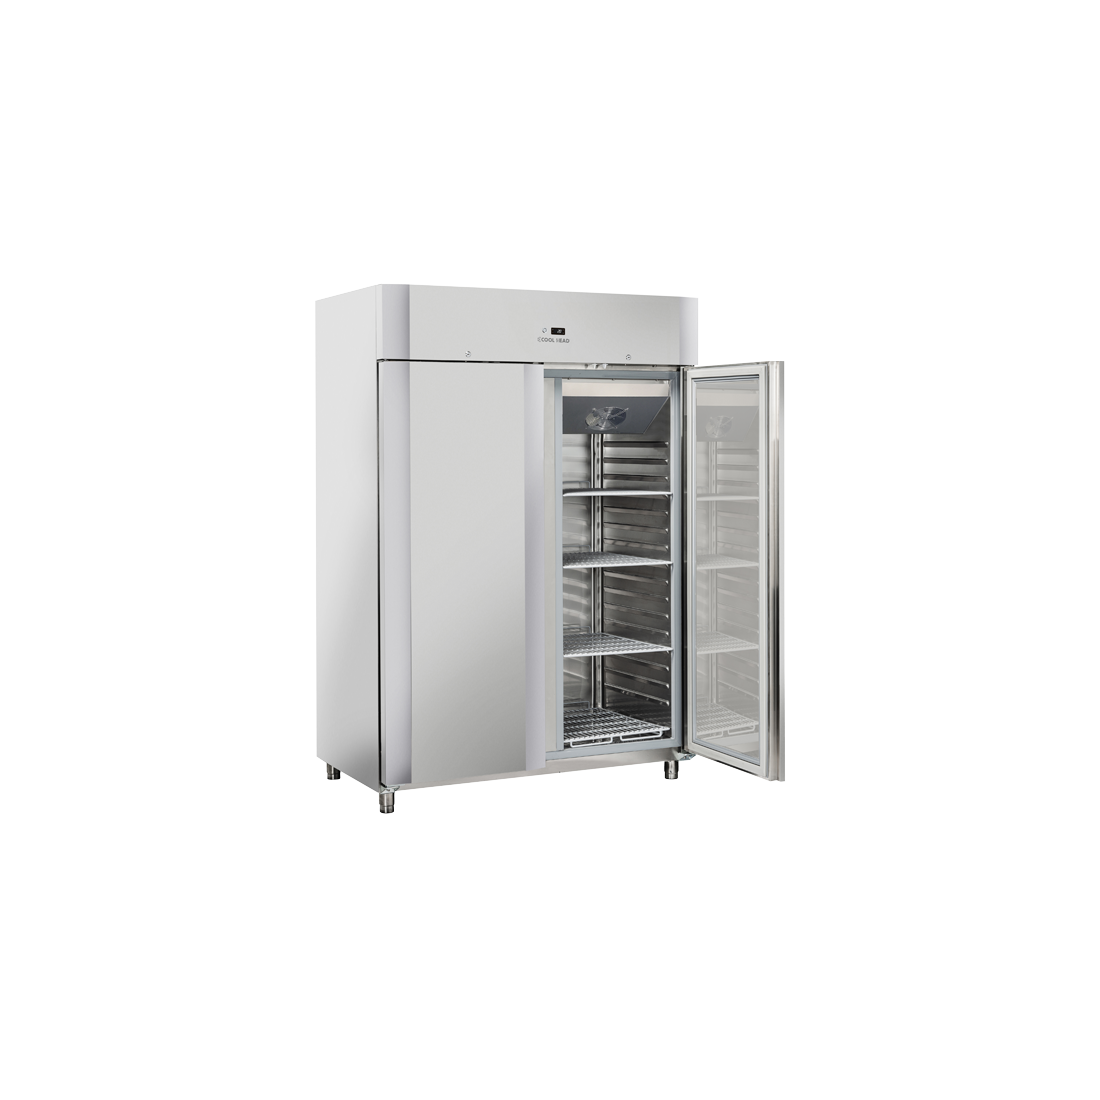 COOL HEAD ,QR12, stainless Steel Upright Two Door Chiller 1255 Lt|mkayn|مكاين